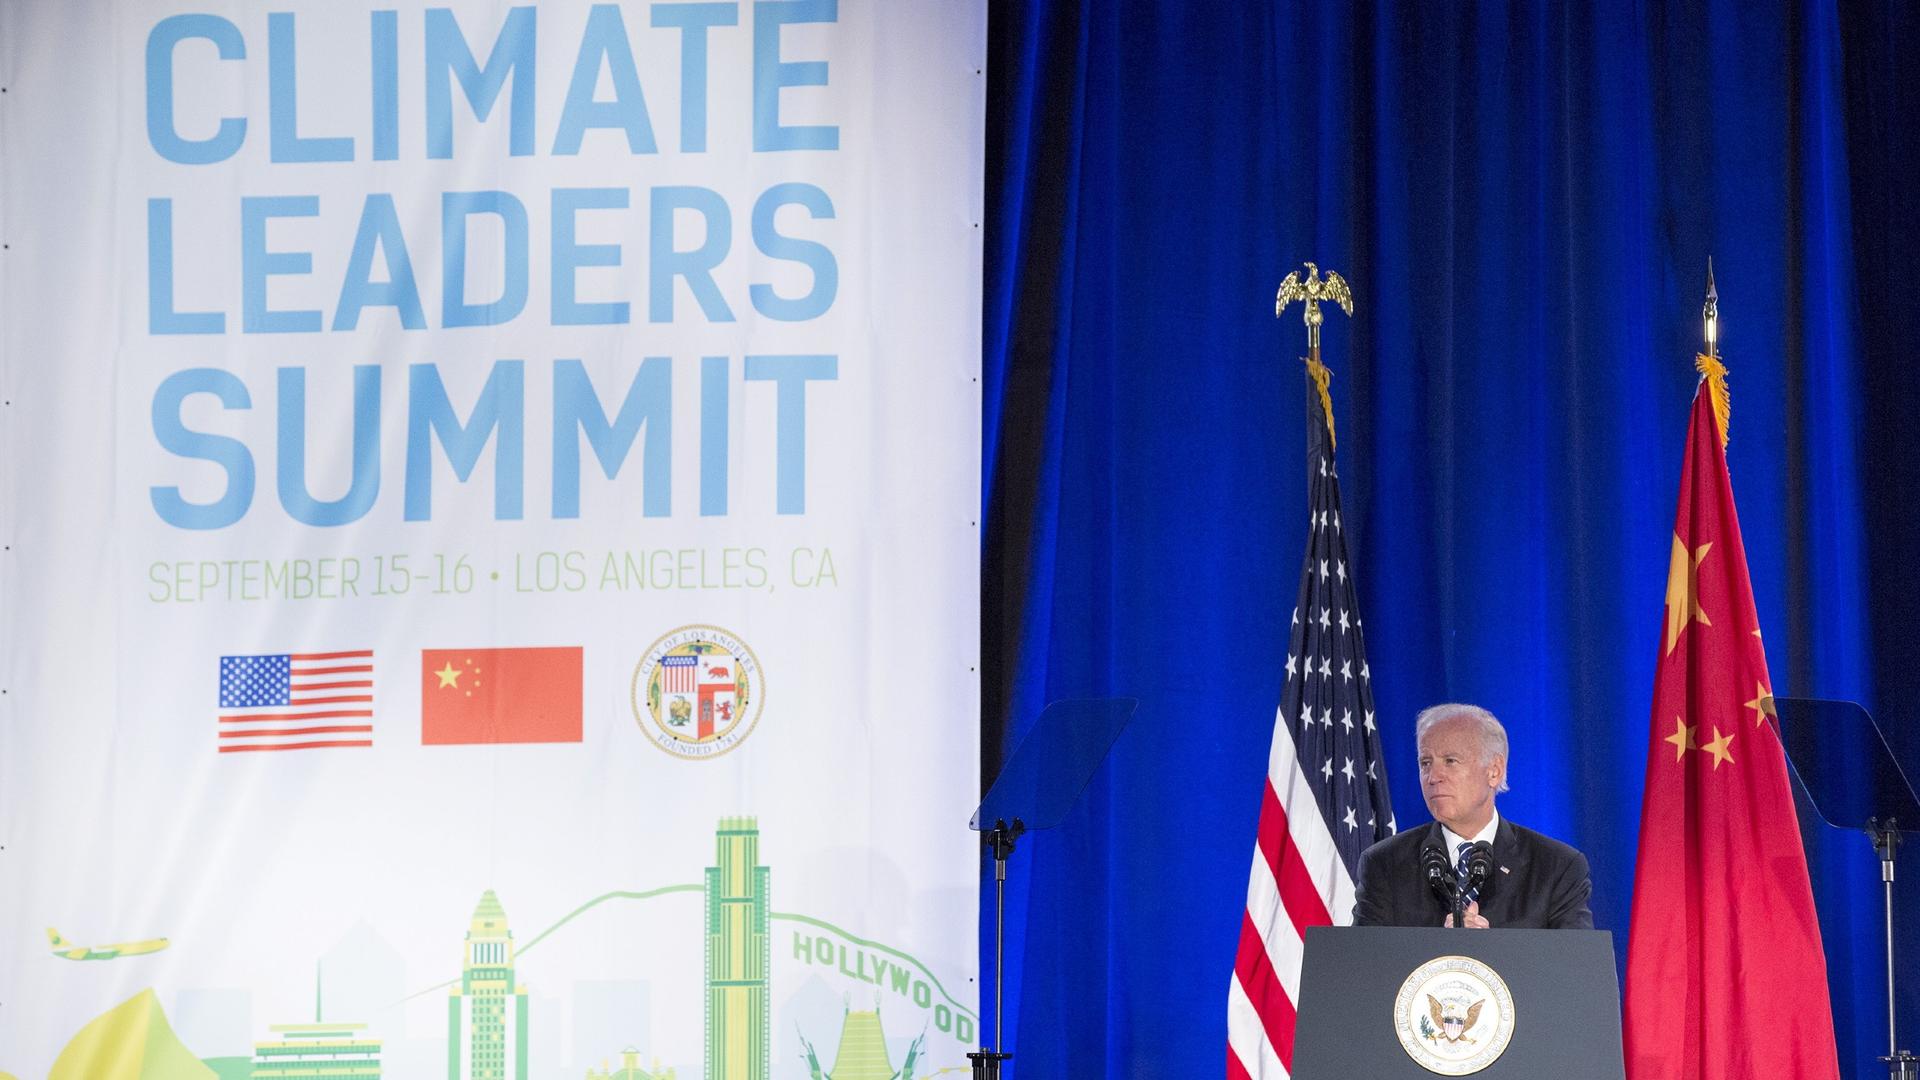 In this file photo, then-Vice President Joe Biden speaks at the closing session of the US-China Climate Leaders Summit in Los Angeles, California, Sept. 16, 2015.